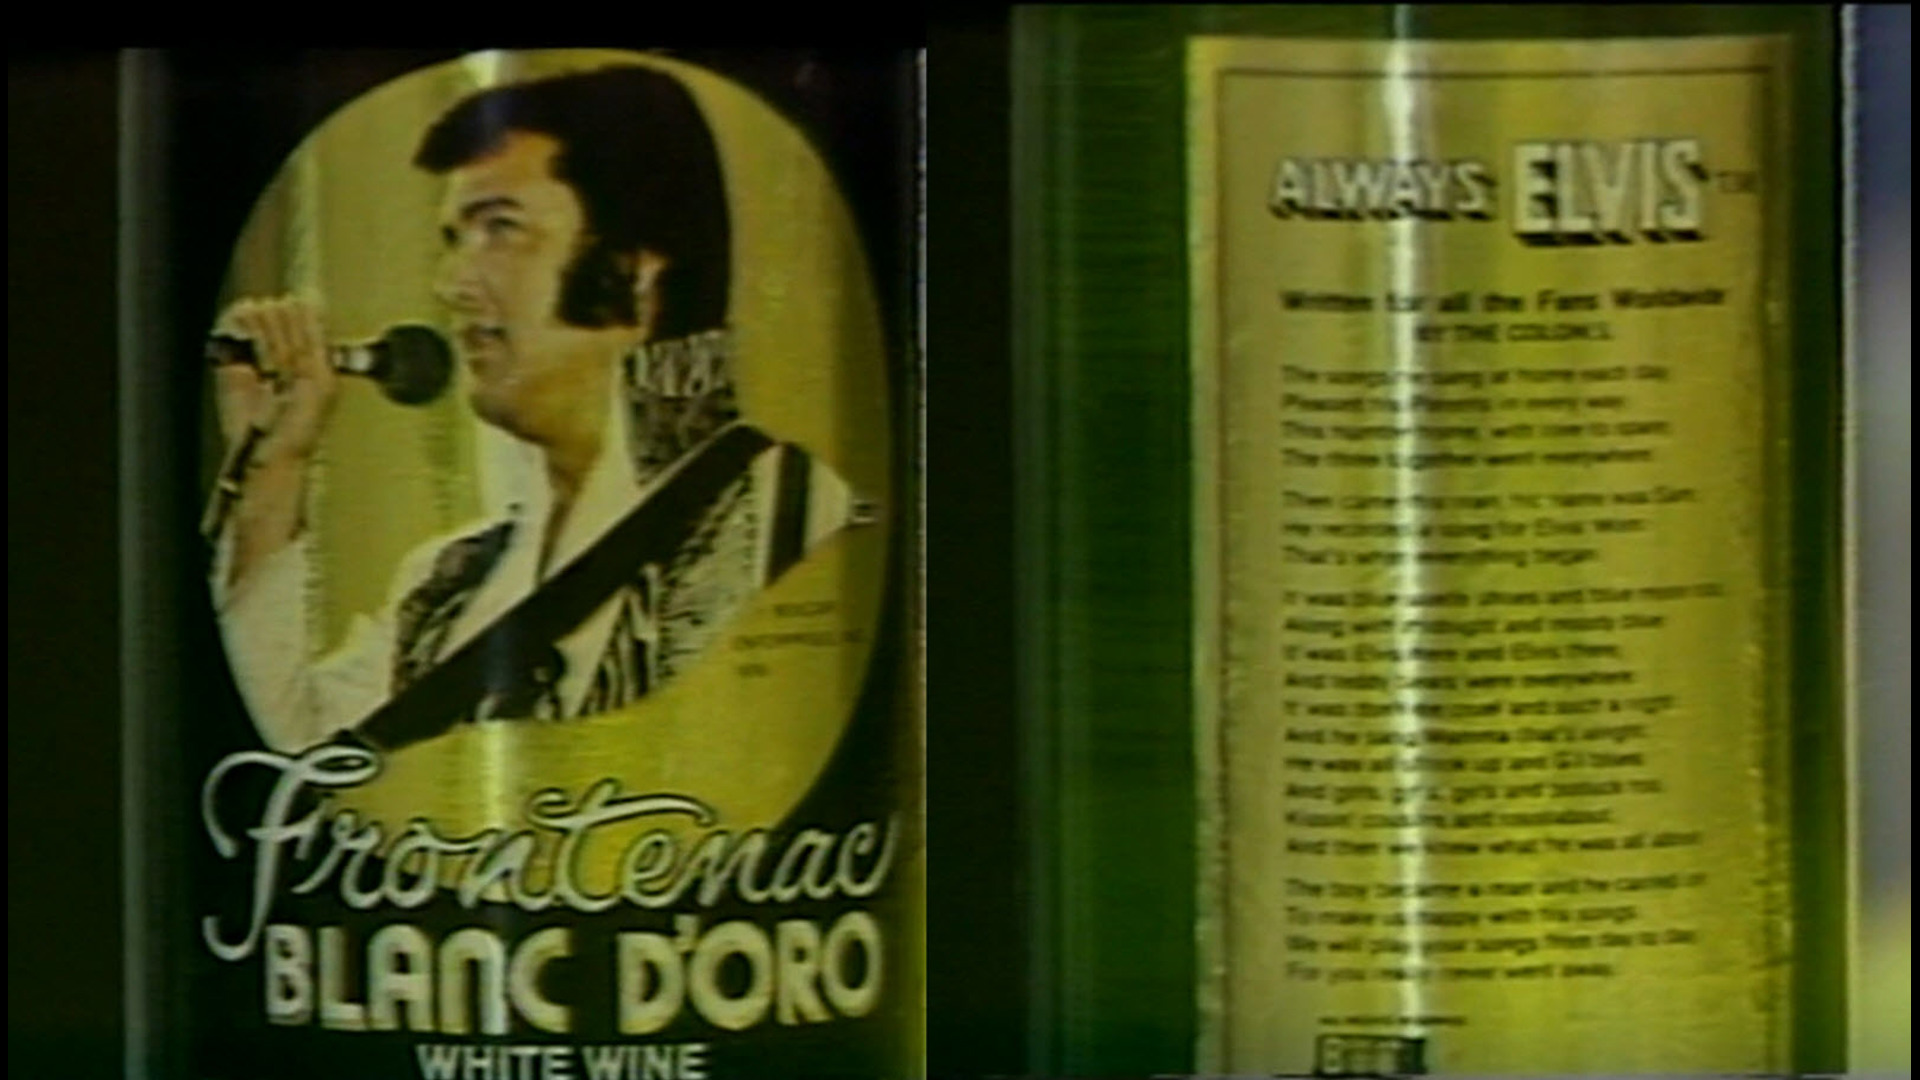 Always Elvis wine--CBS 8 employees test it out in 1980. Anchor Allison Ross said the wine was terrific.